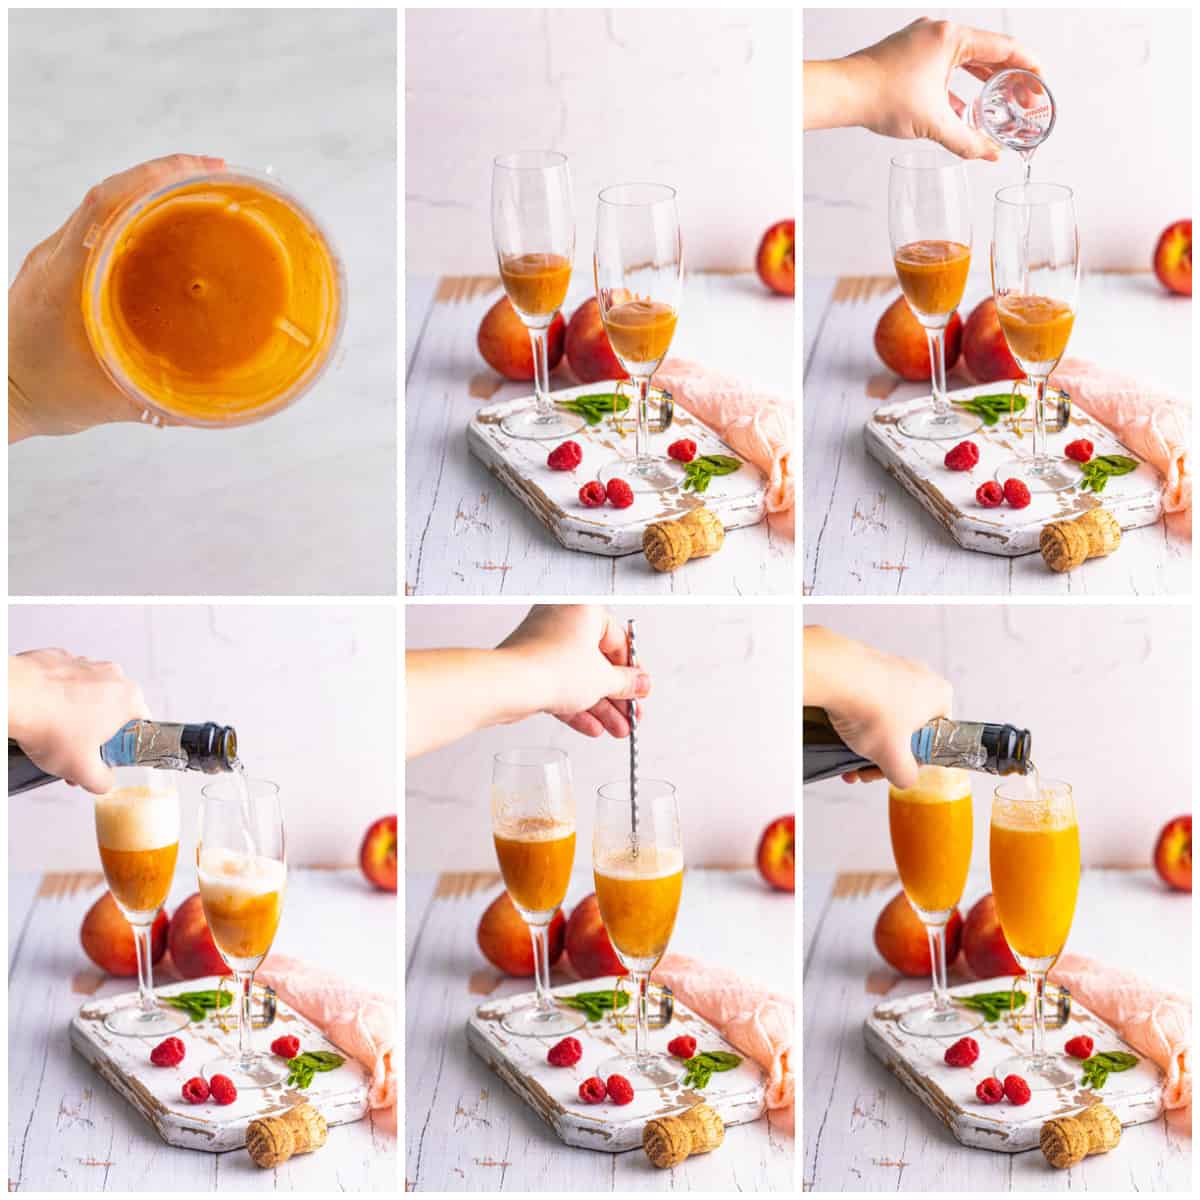 Step by step photos on how to make a Peach Bellini.